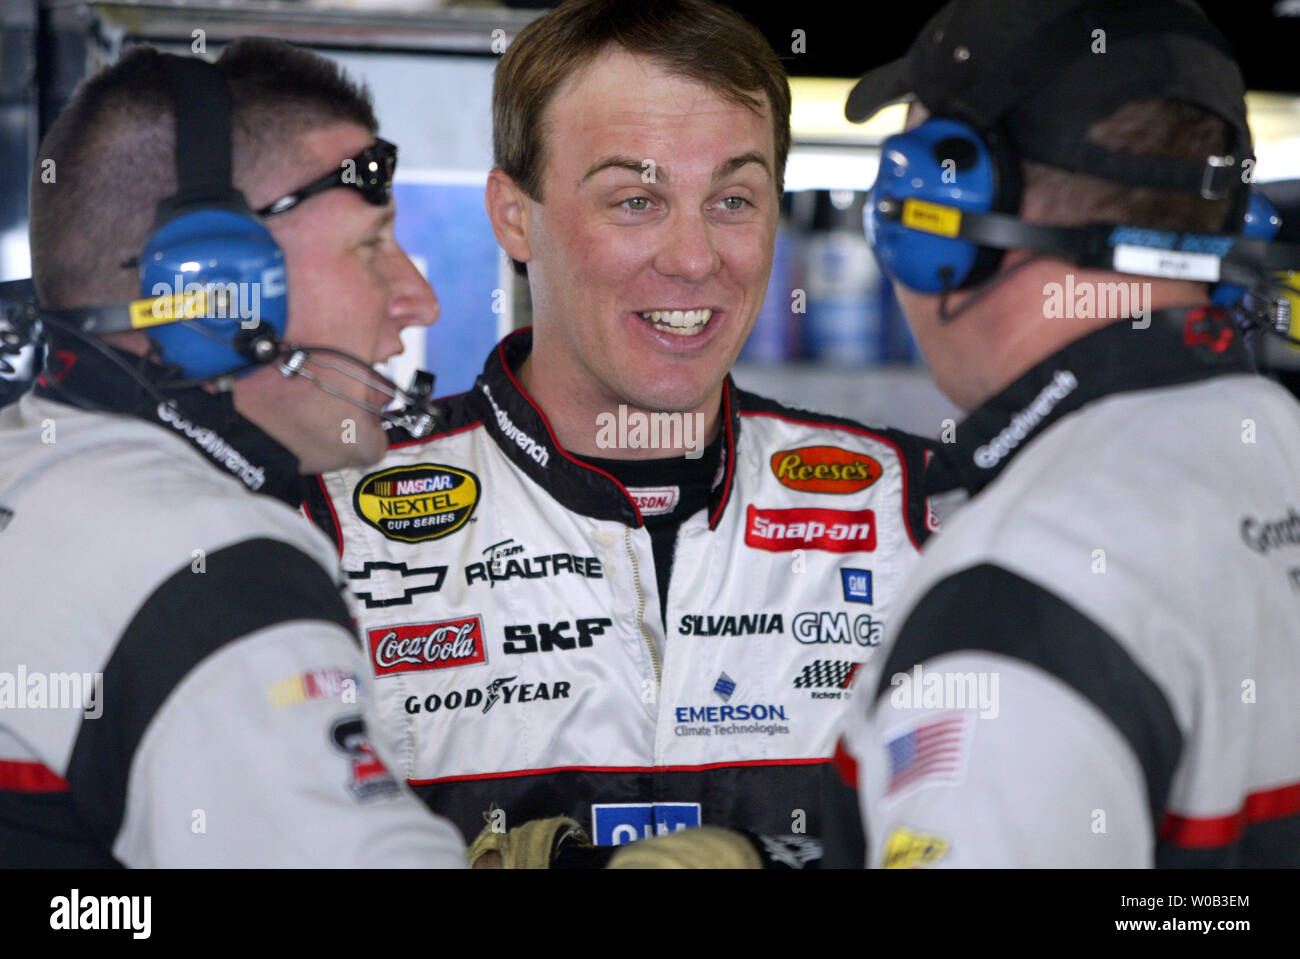 NASCAR race car driver Kevin Harvick,  center, talks with members of his GM Goodwrench Chevrolet crew before practice for the DIRECTV 500 at the Martinsville Speedway in Martinsville, VA on March 31, 2006. (UPI Photo/Nell Redmond) Stock Photo